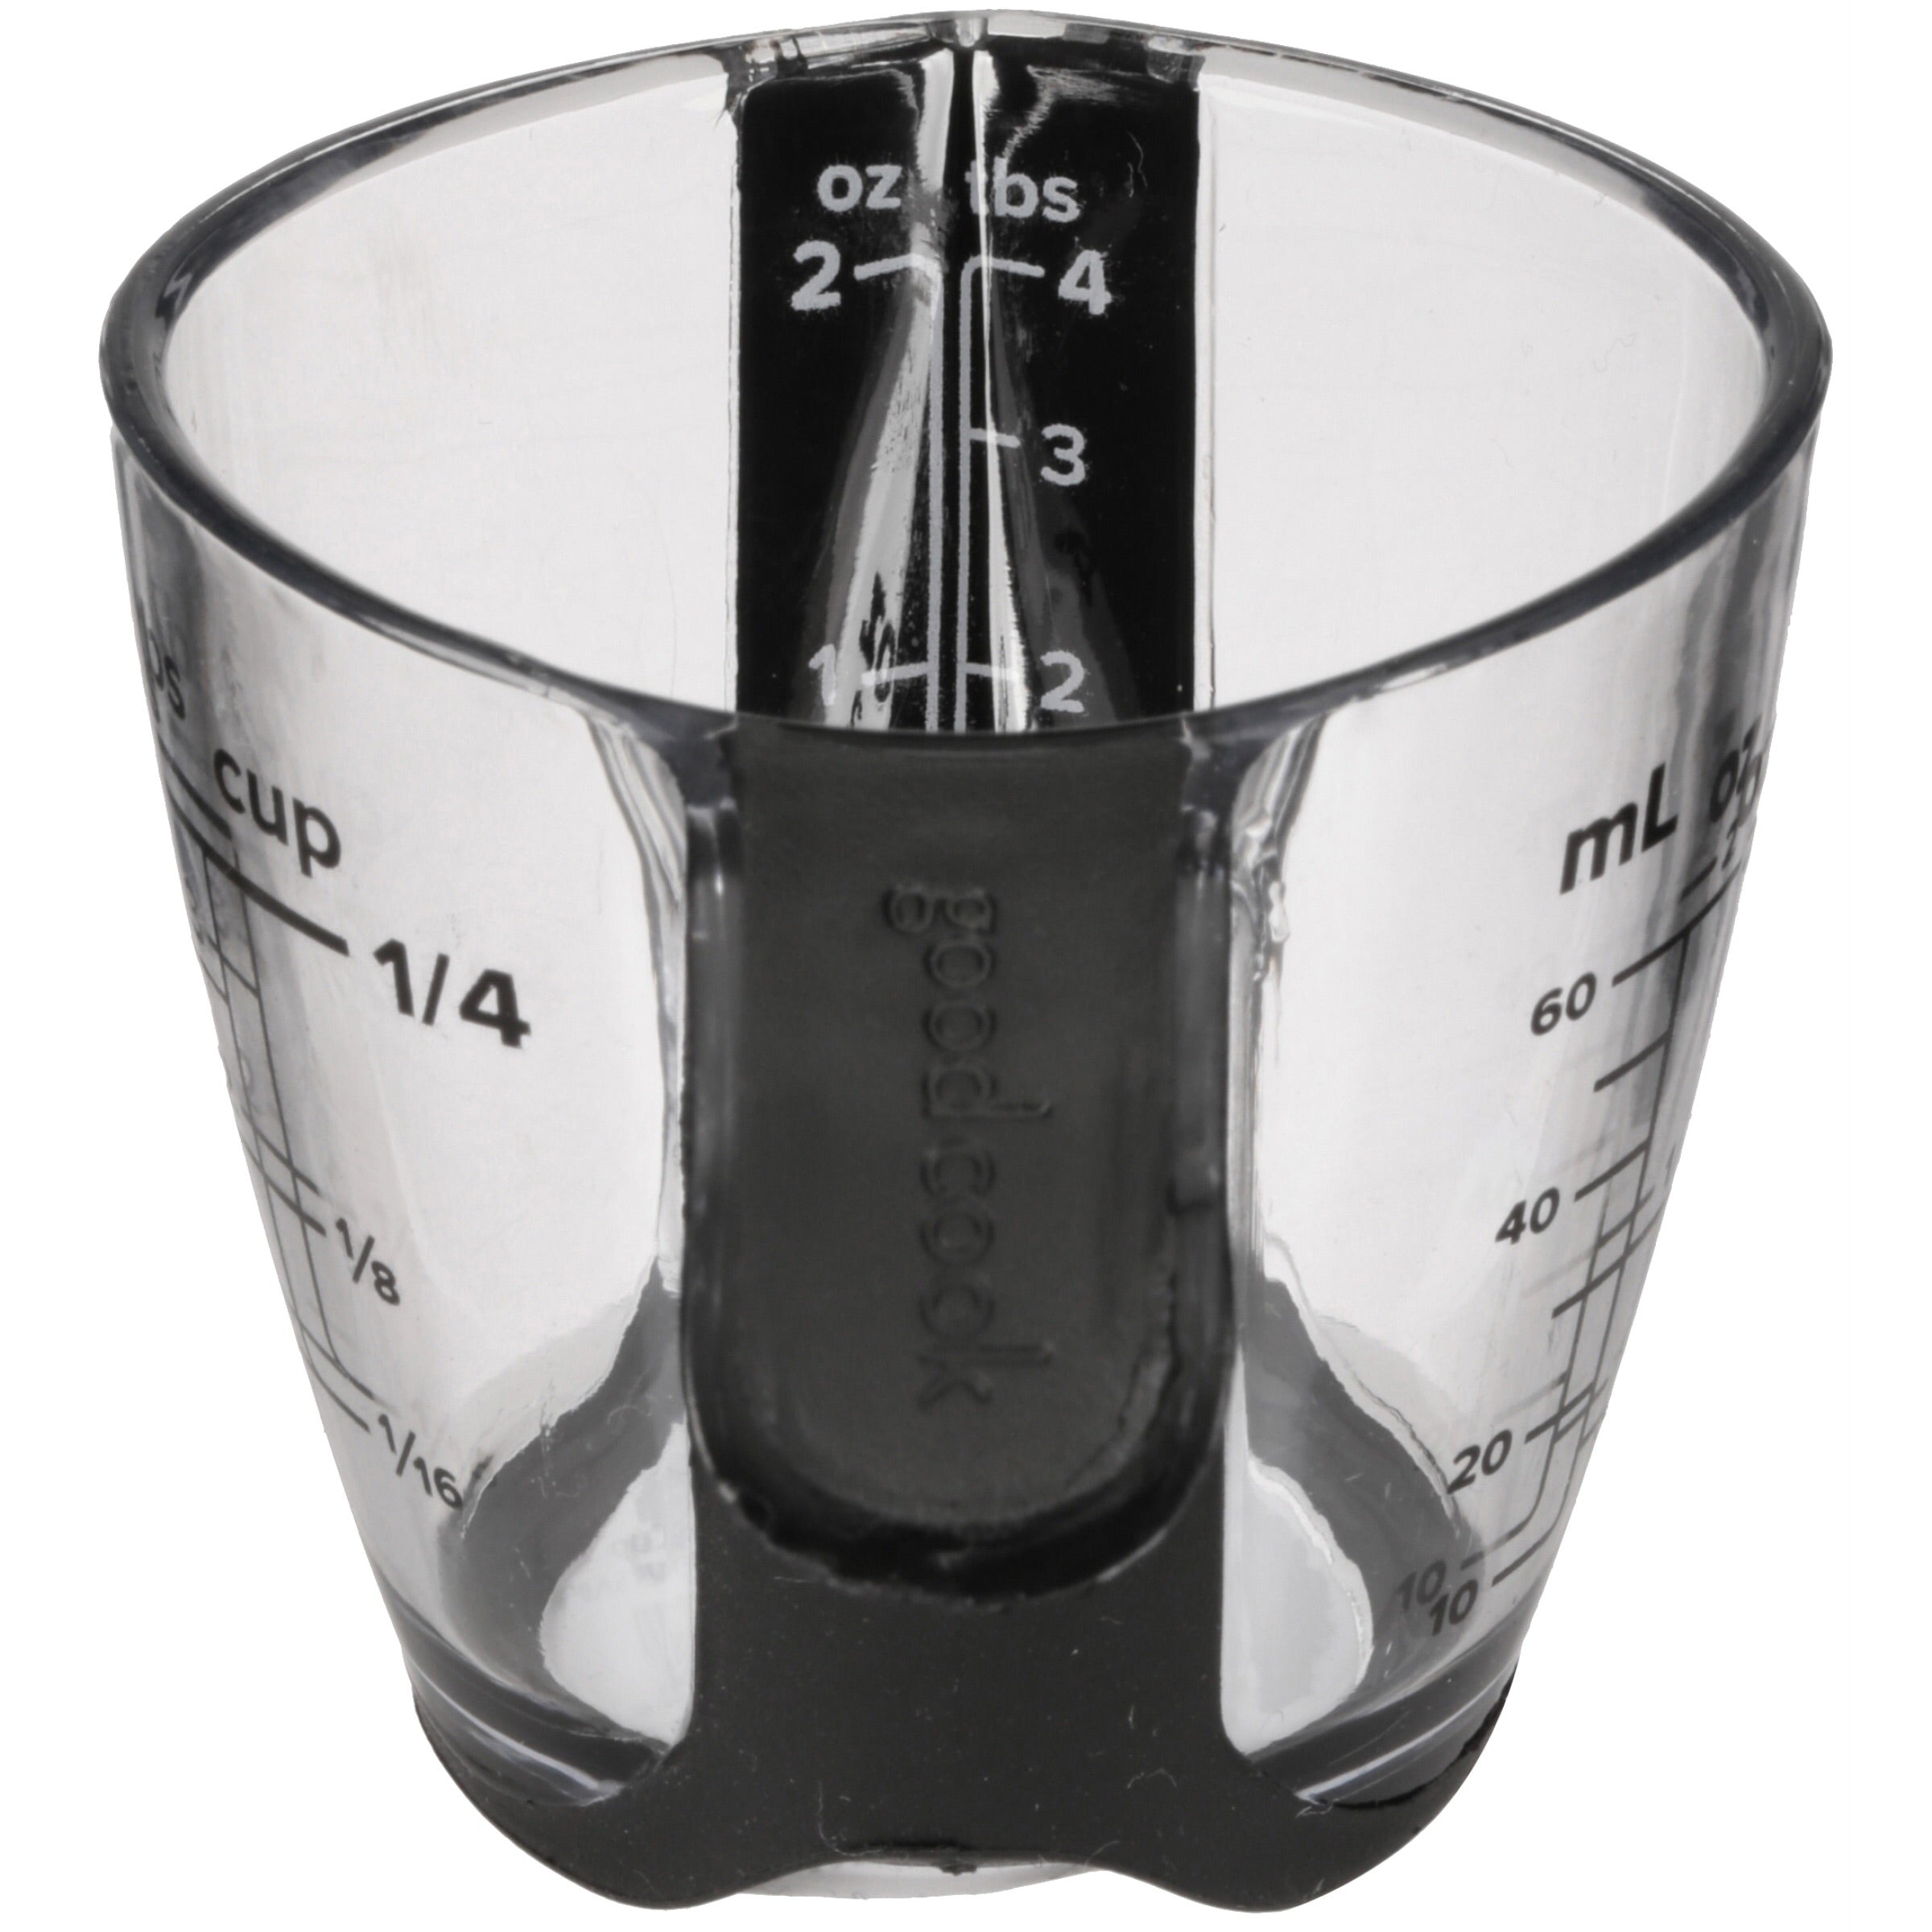 Measuring Cup and Lid by Ratio Rite - Slavens Racing